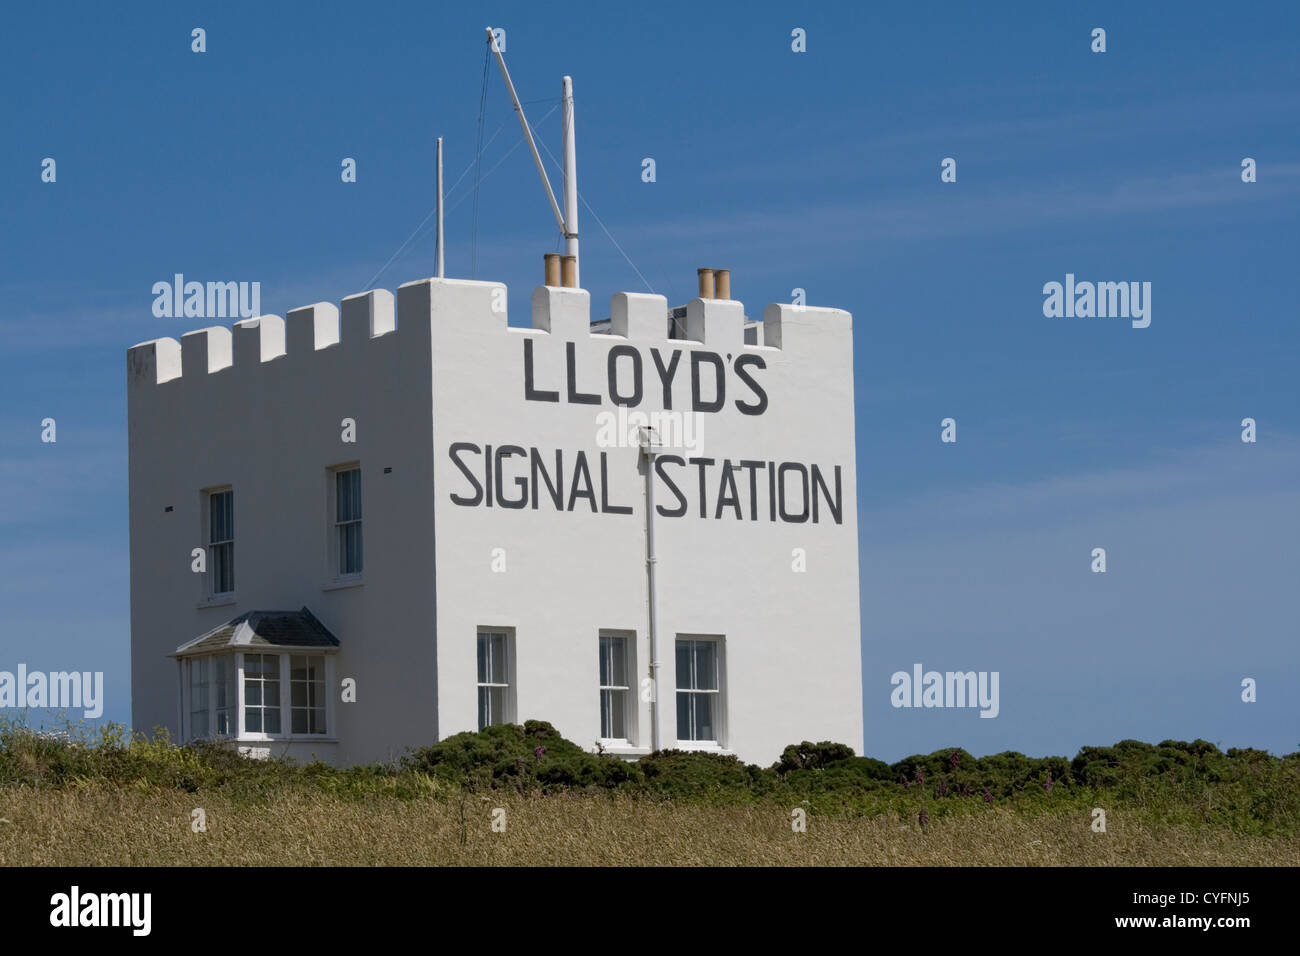 Lloyds Signal Station on the Lizard Peninsula Cornwall, UK.  The arrival of ships in the English Channel was relayed to London. Stock Photo